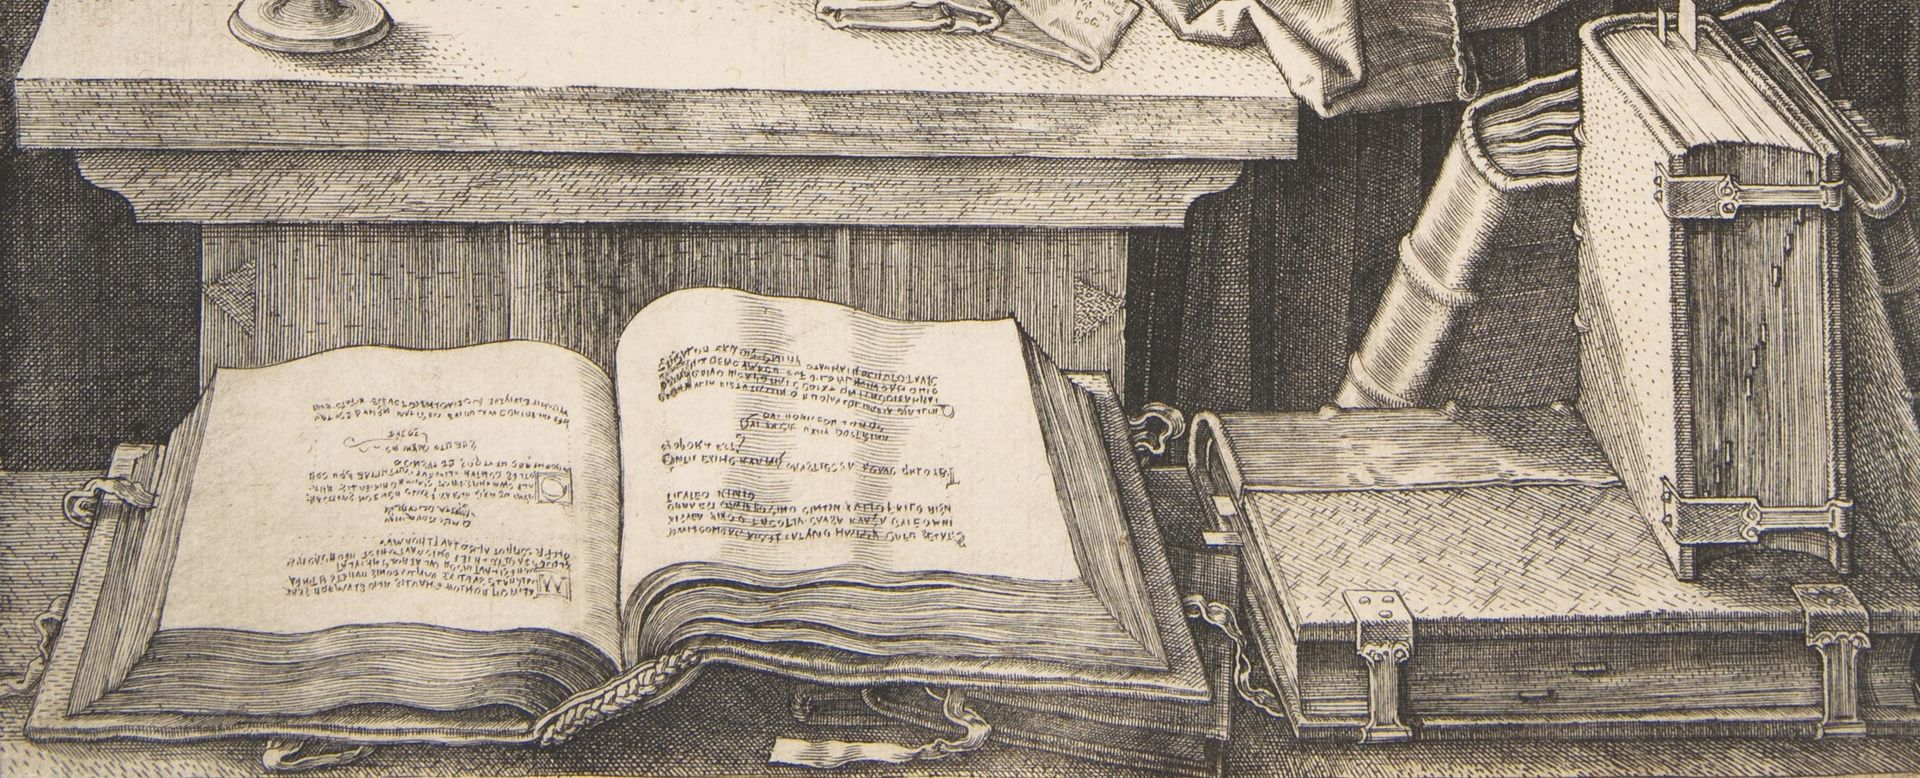 Engraving of open and closed books on a tabletop.